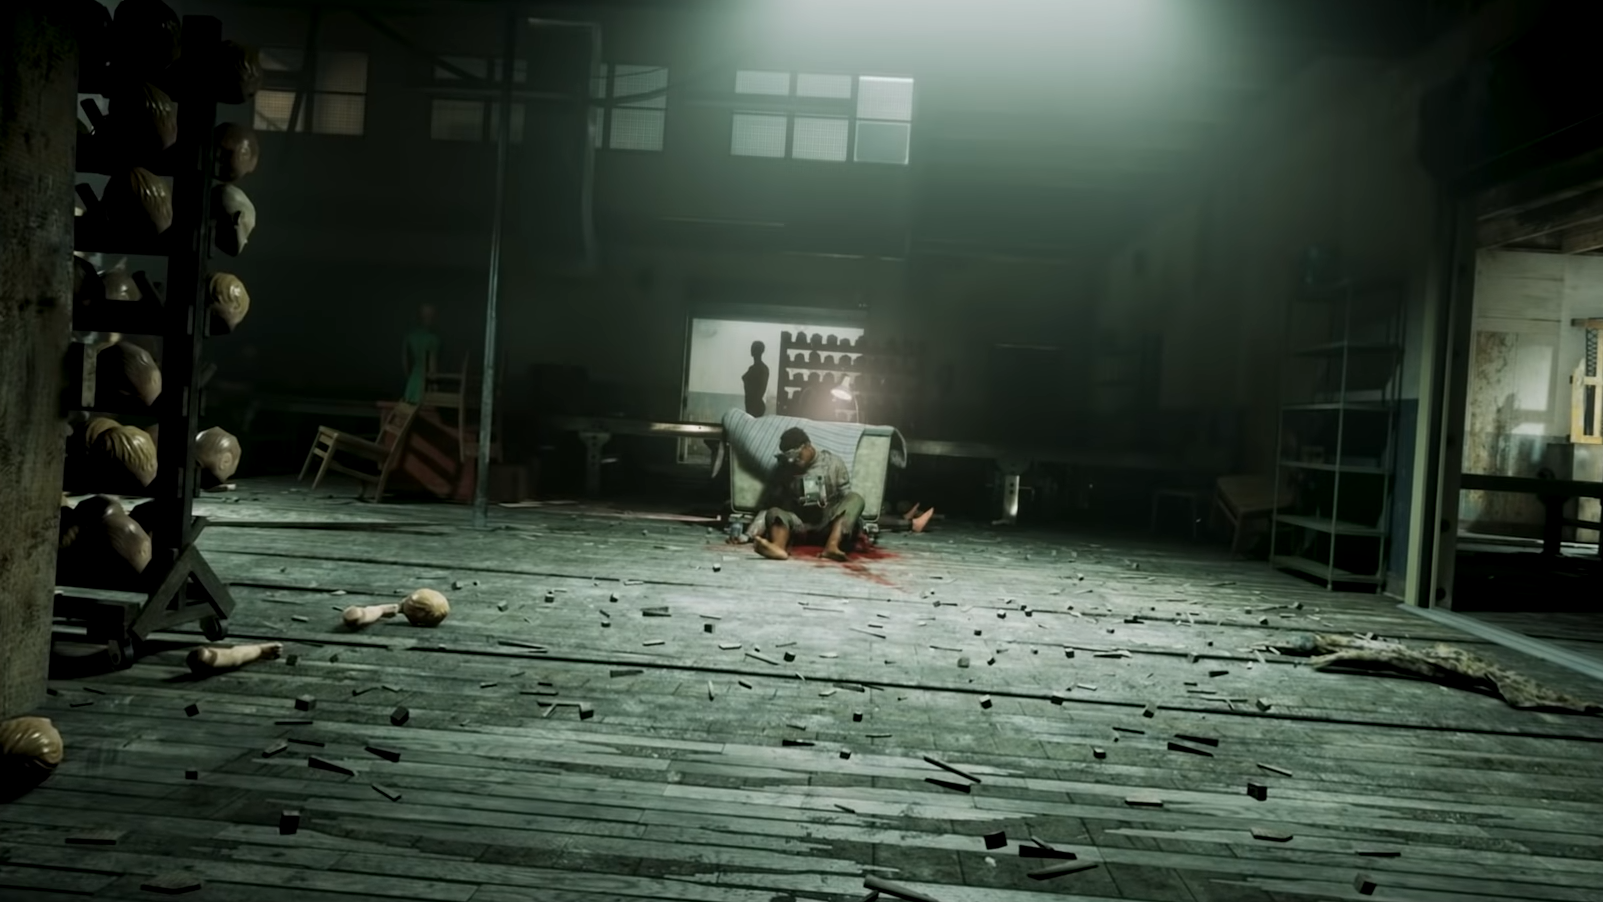 The Outlast Trials Gameplay Trailer Showcased at Gamescom Opening Night Live